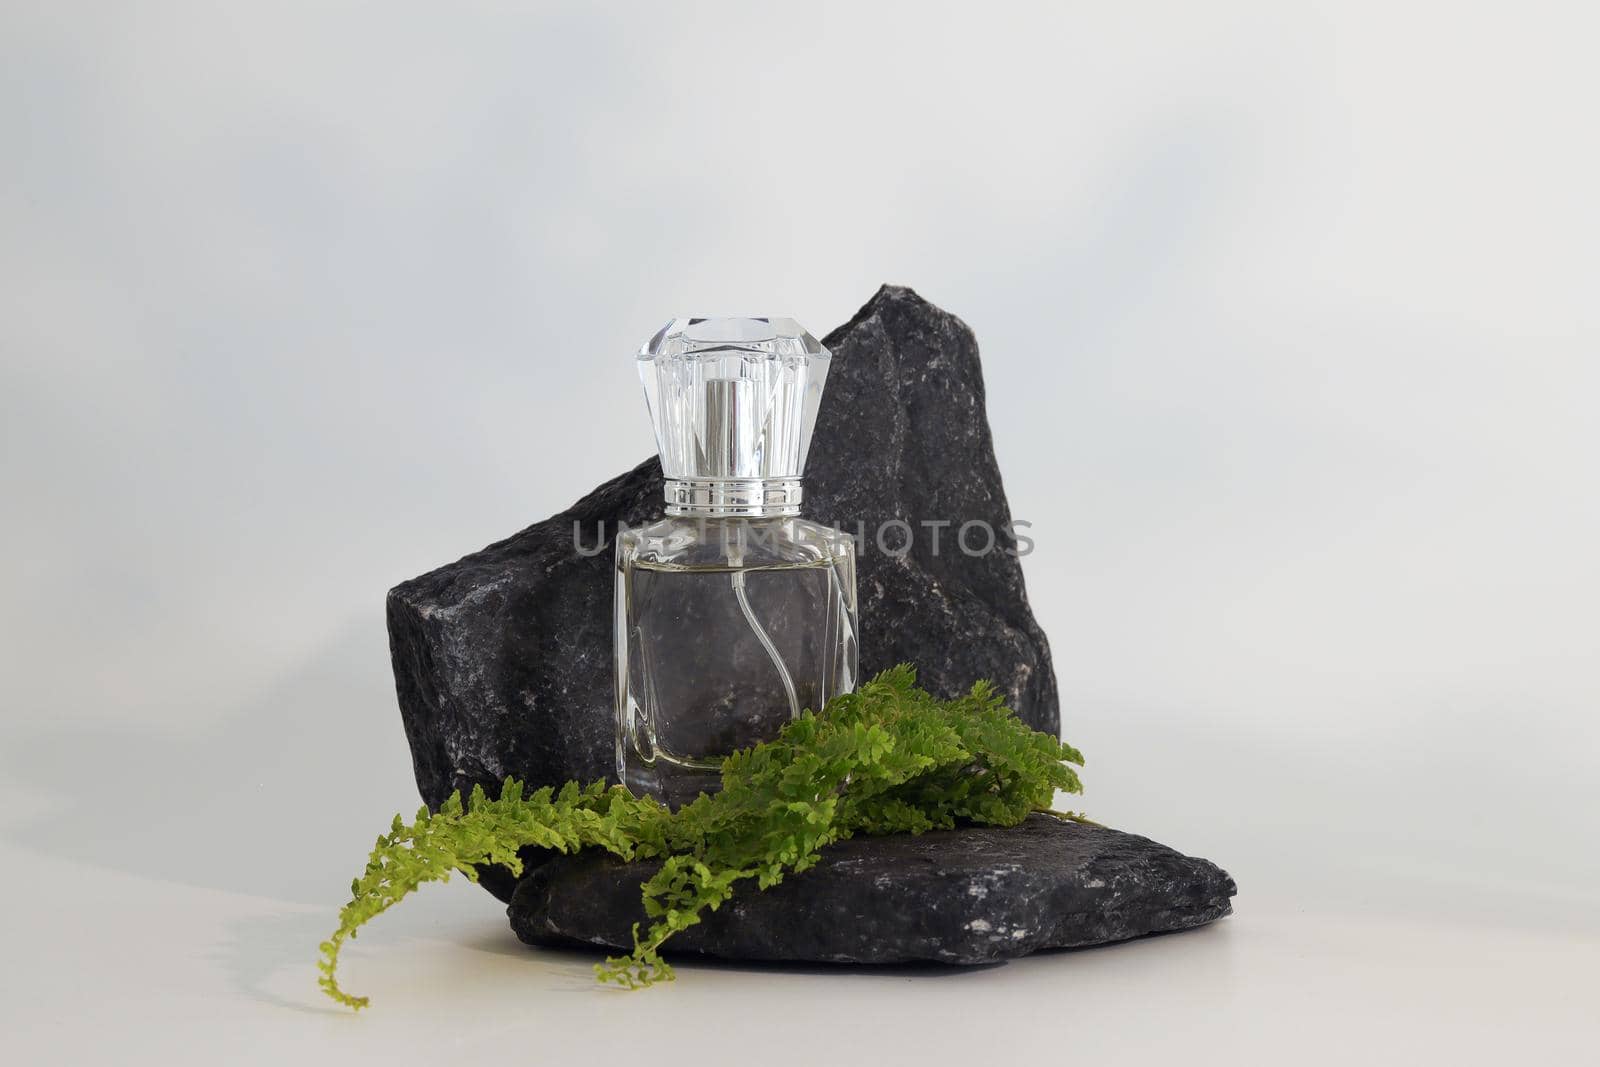 Unbranded perfume bottle standing on stone podium with plants. Perfume presentation on the white background. Mockup. Trending concept in natural materials. Women's and men's essence. Natural cosmetic